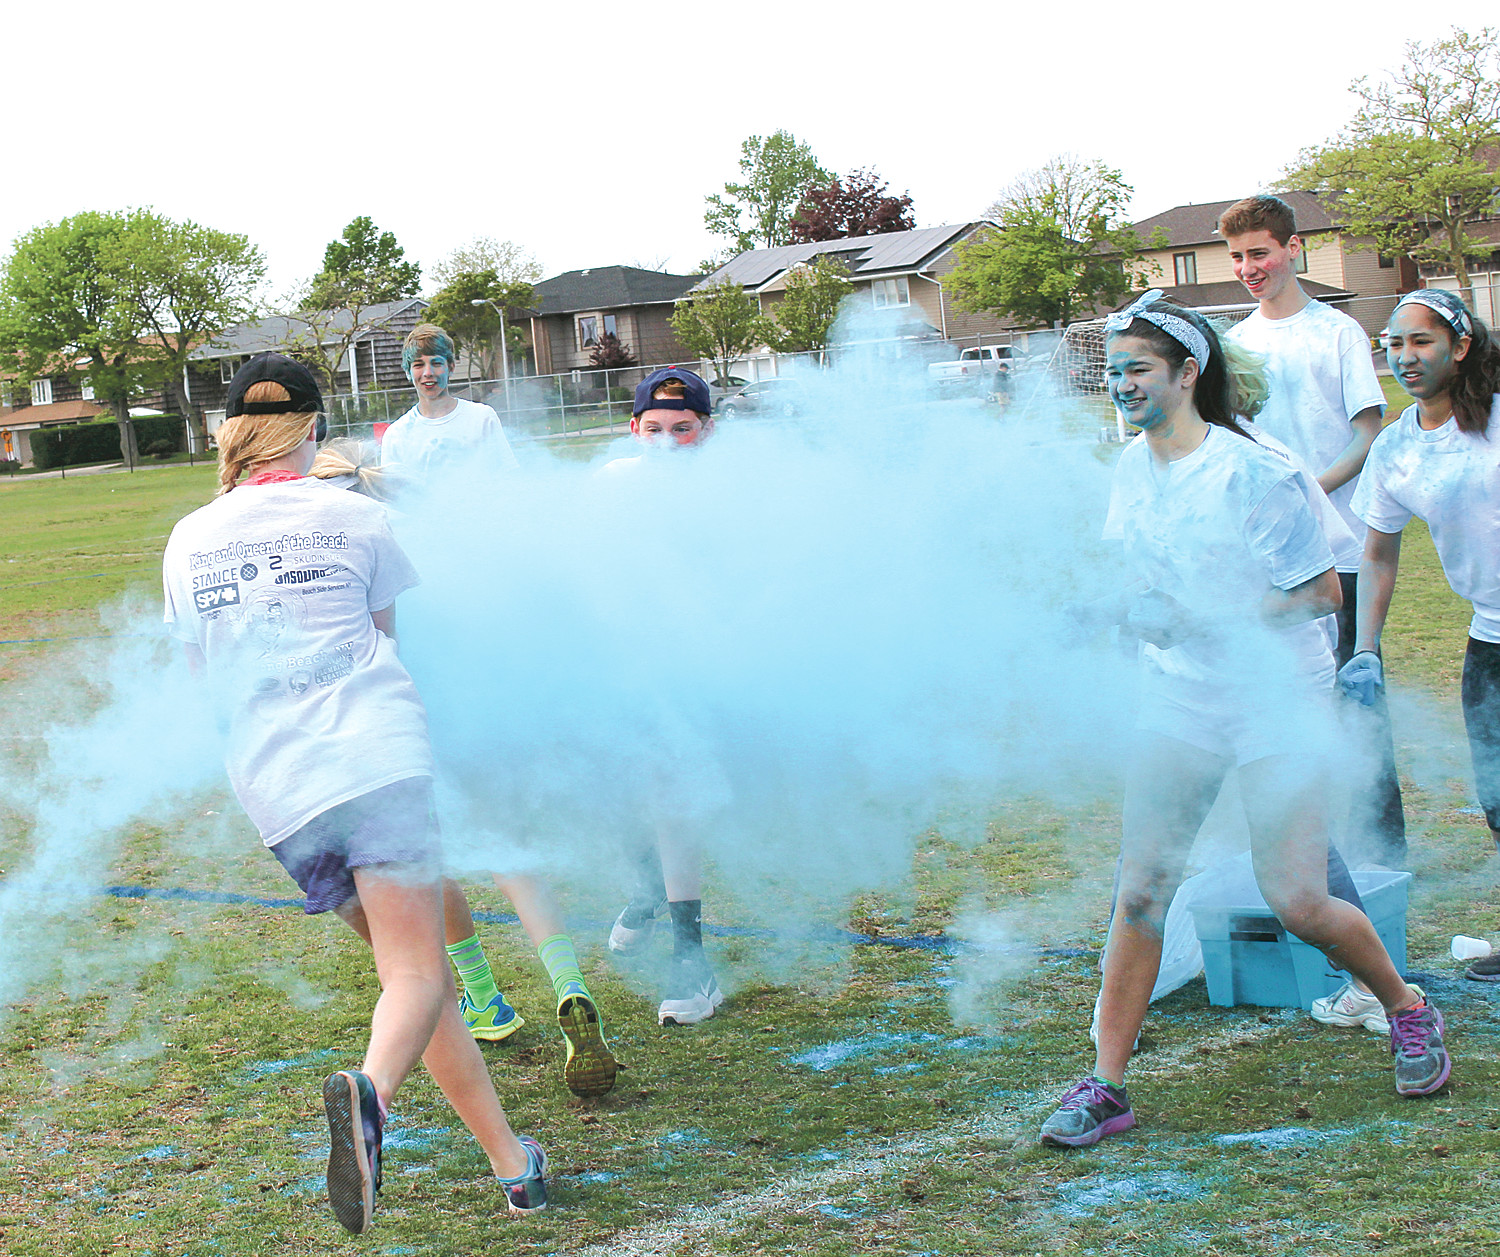 Clouds of all colors filled the air as the participants threw colored cornstarch as they crossed the finish line.